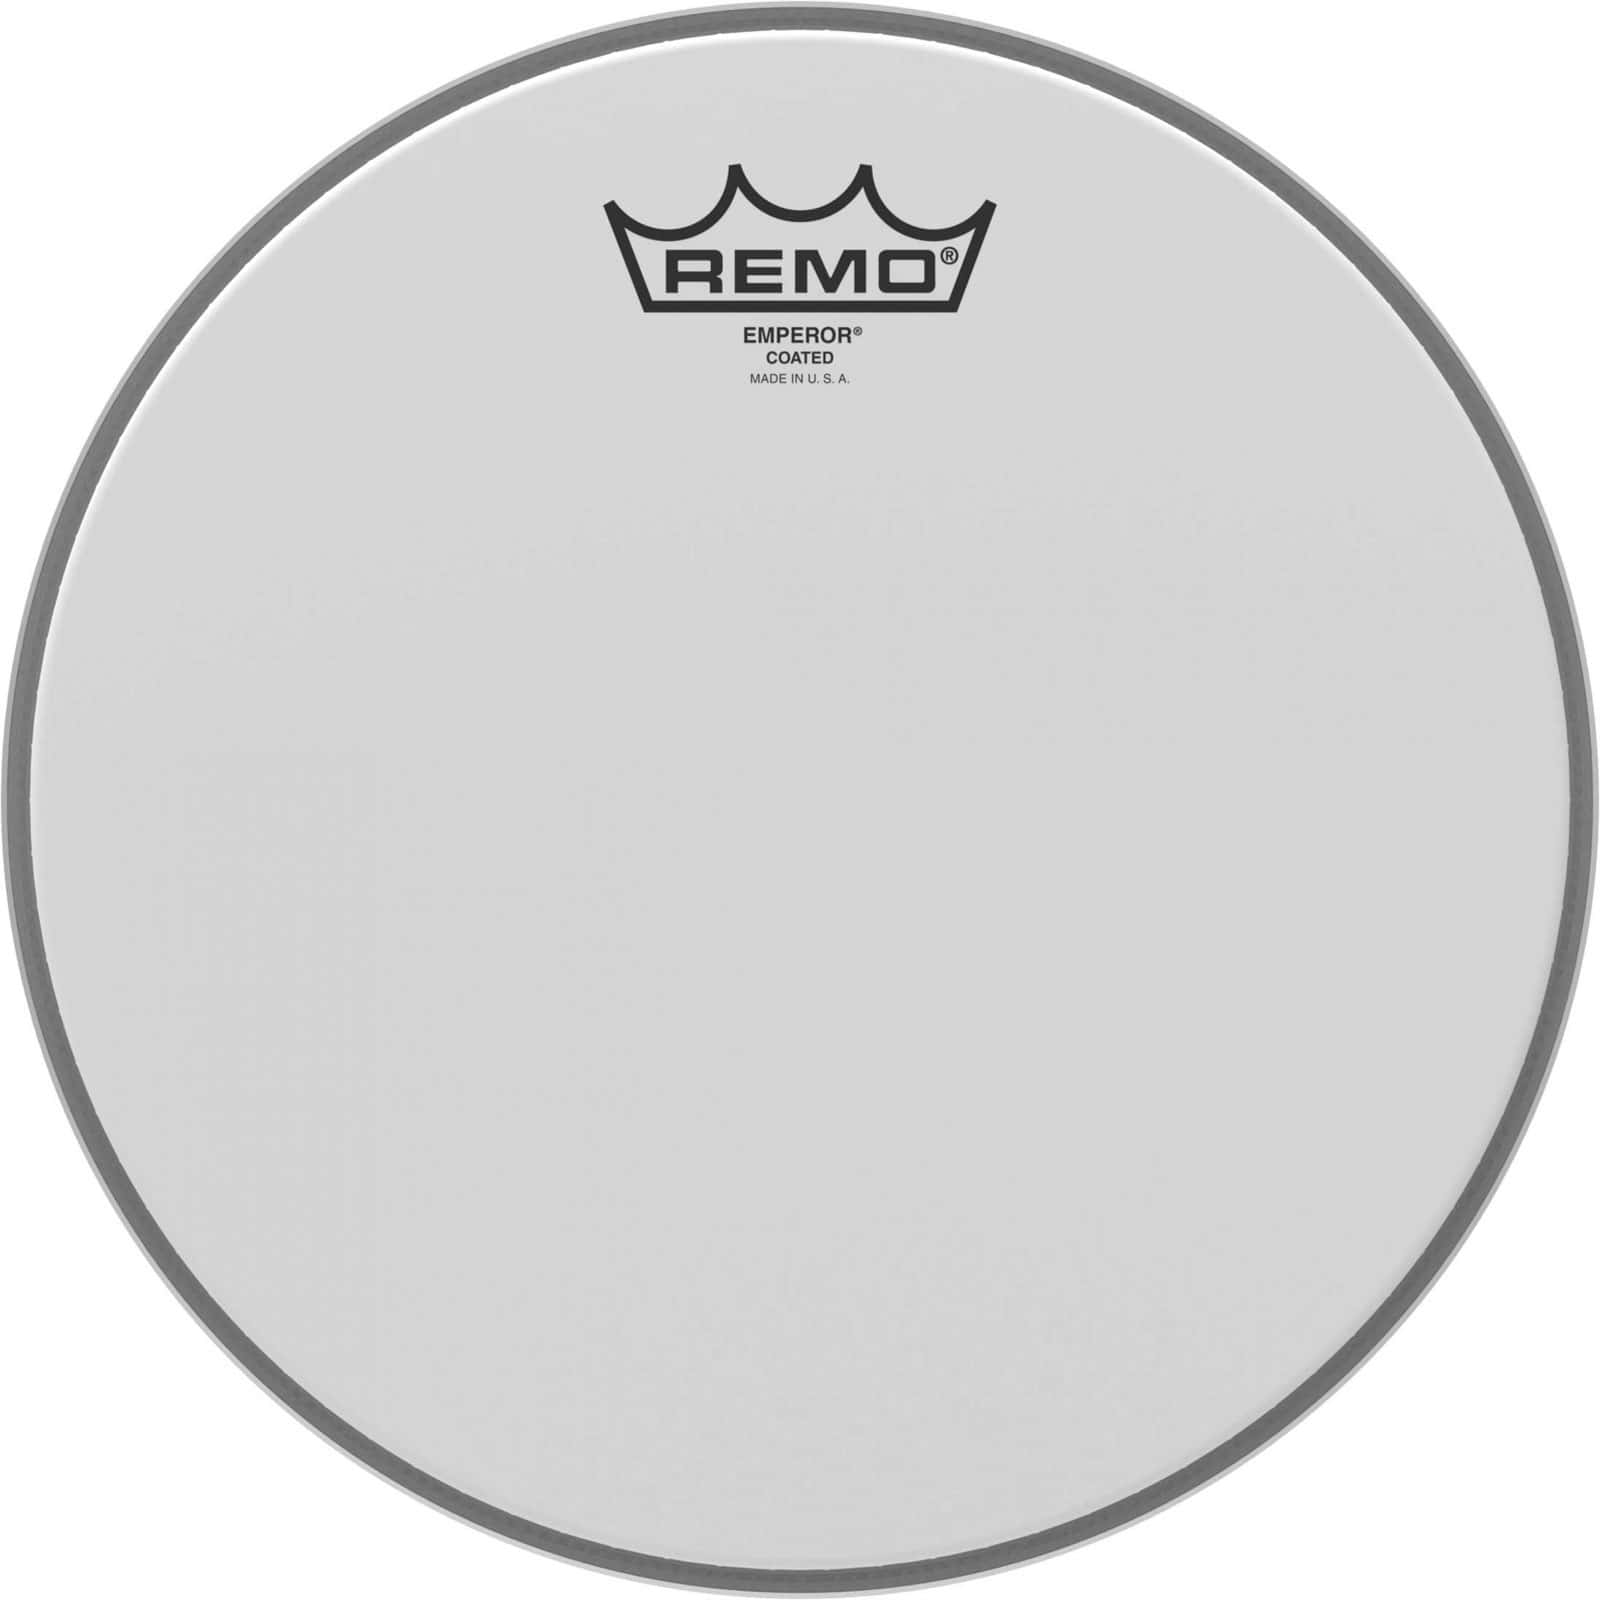 REMO EMPEROR 10 - COATED - BE-0110-00